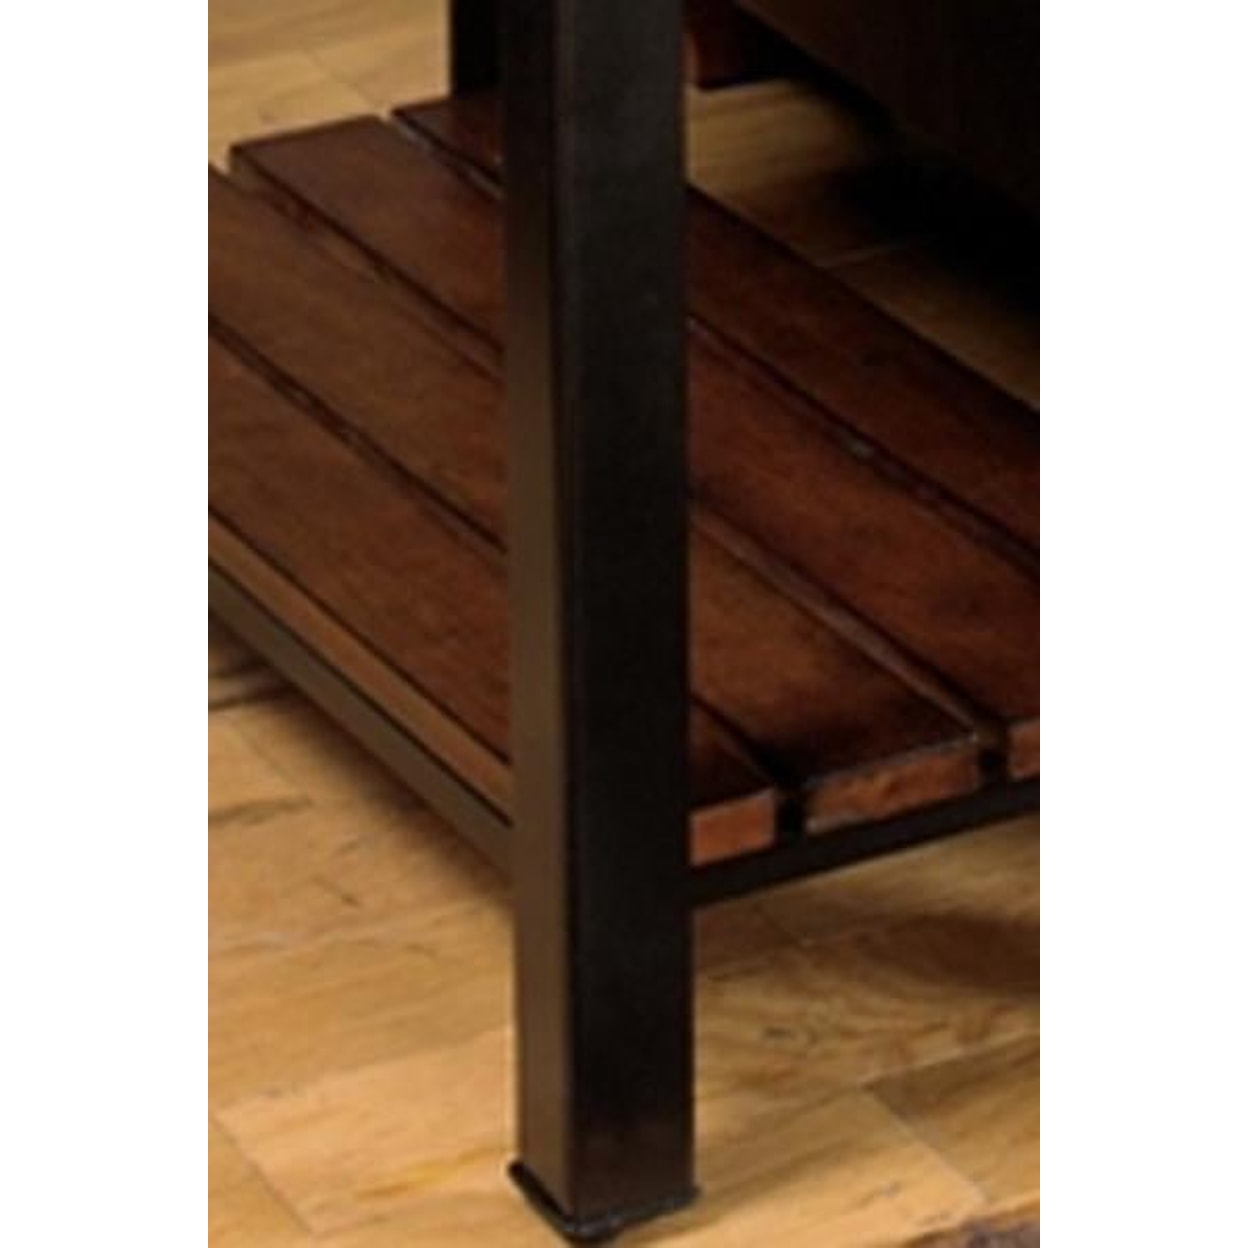 Null Furniture Bryce Canyon End Table